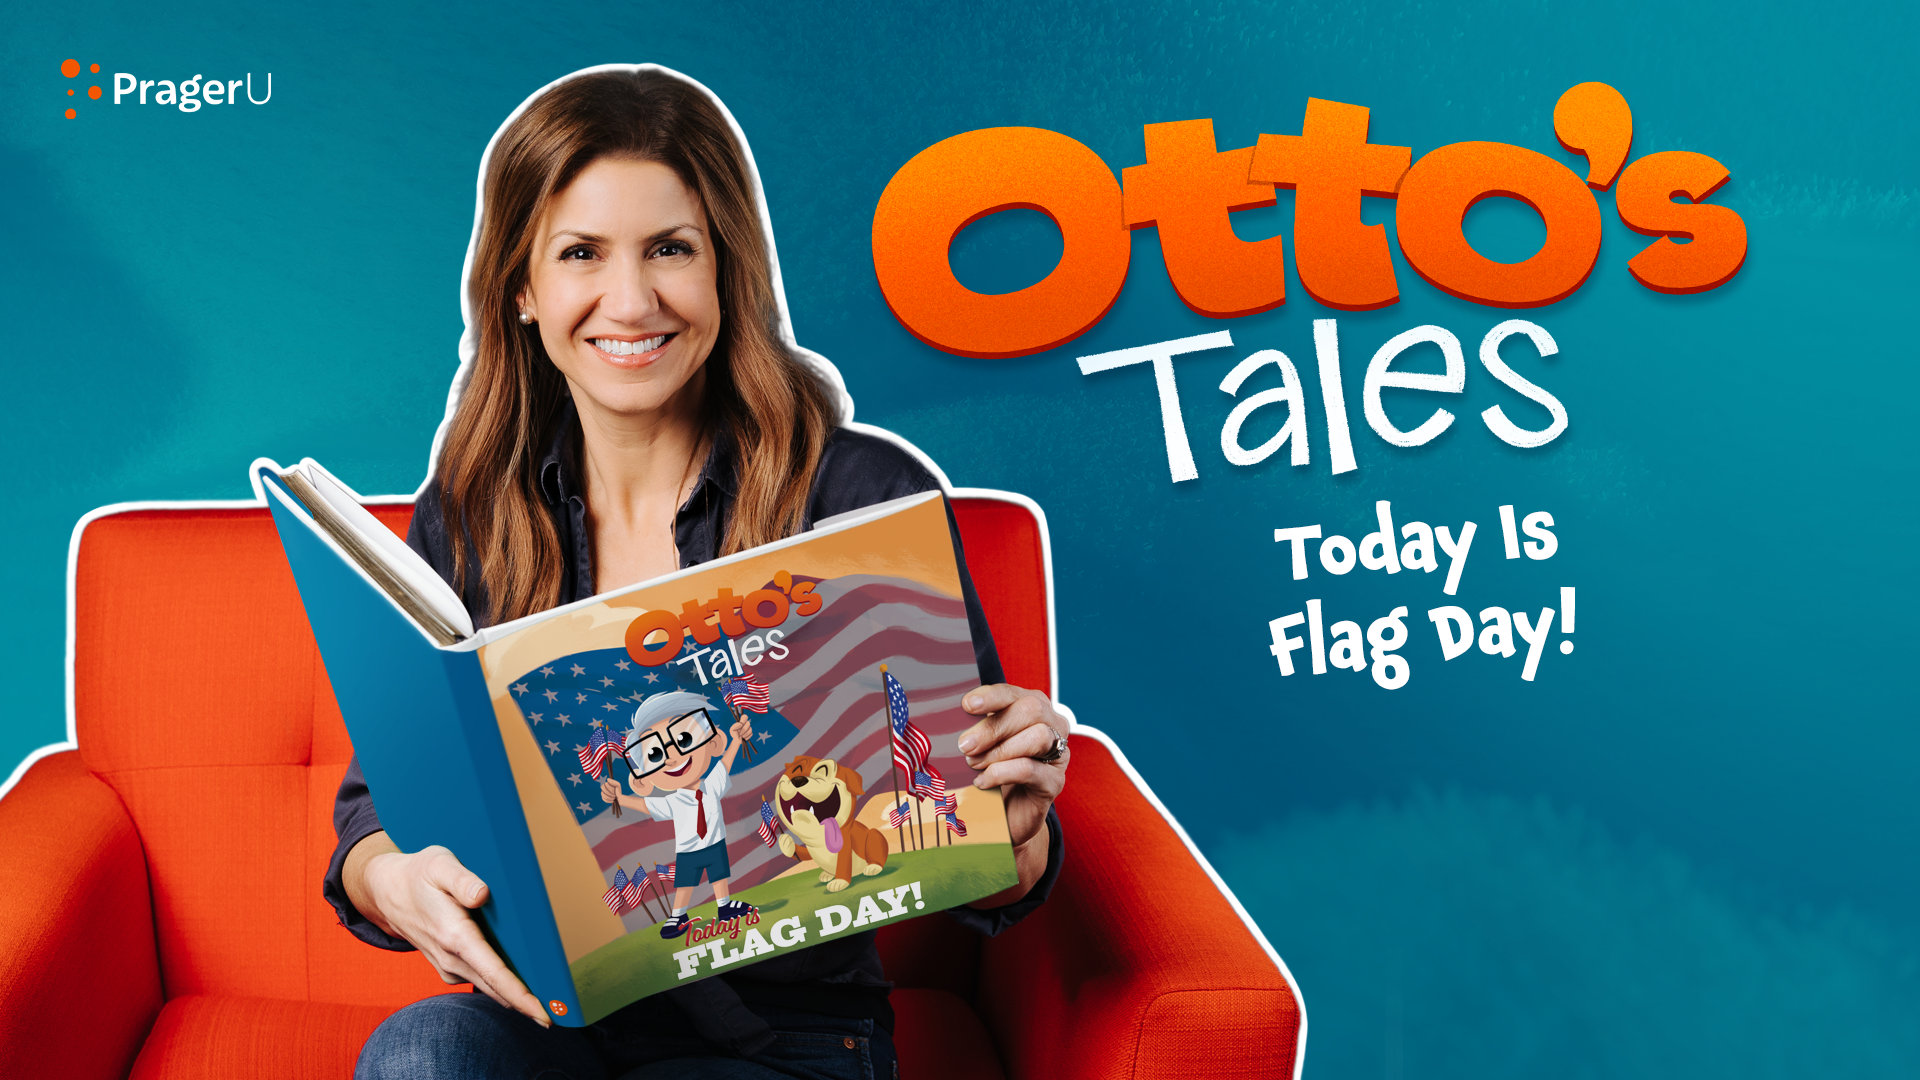 Storytime: Otto's Tales — Today Is Flag Day!